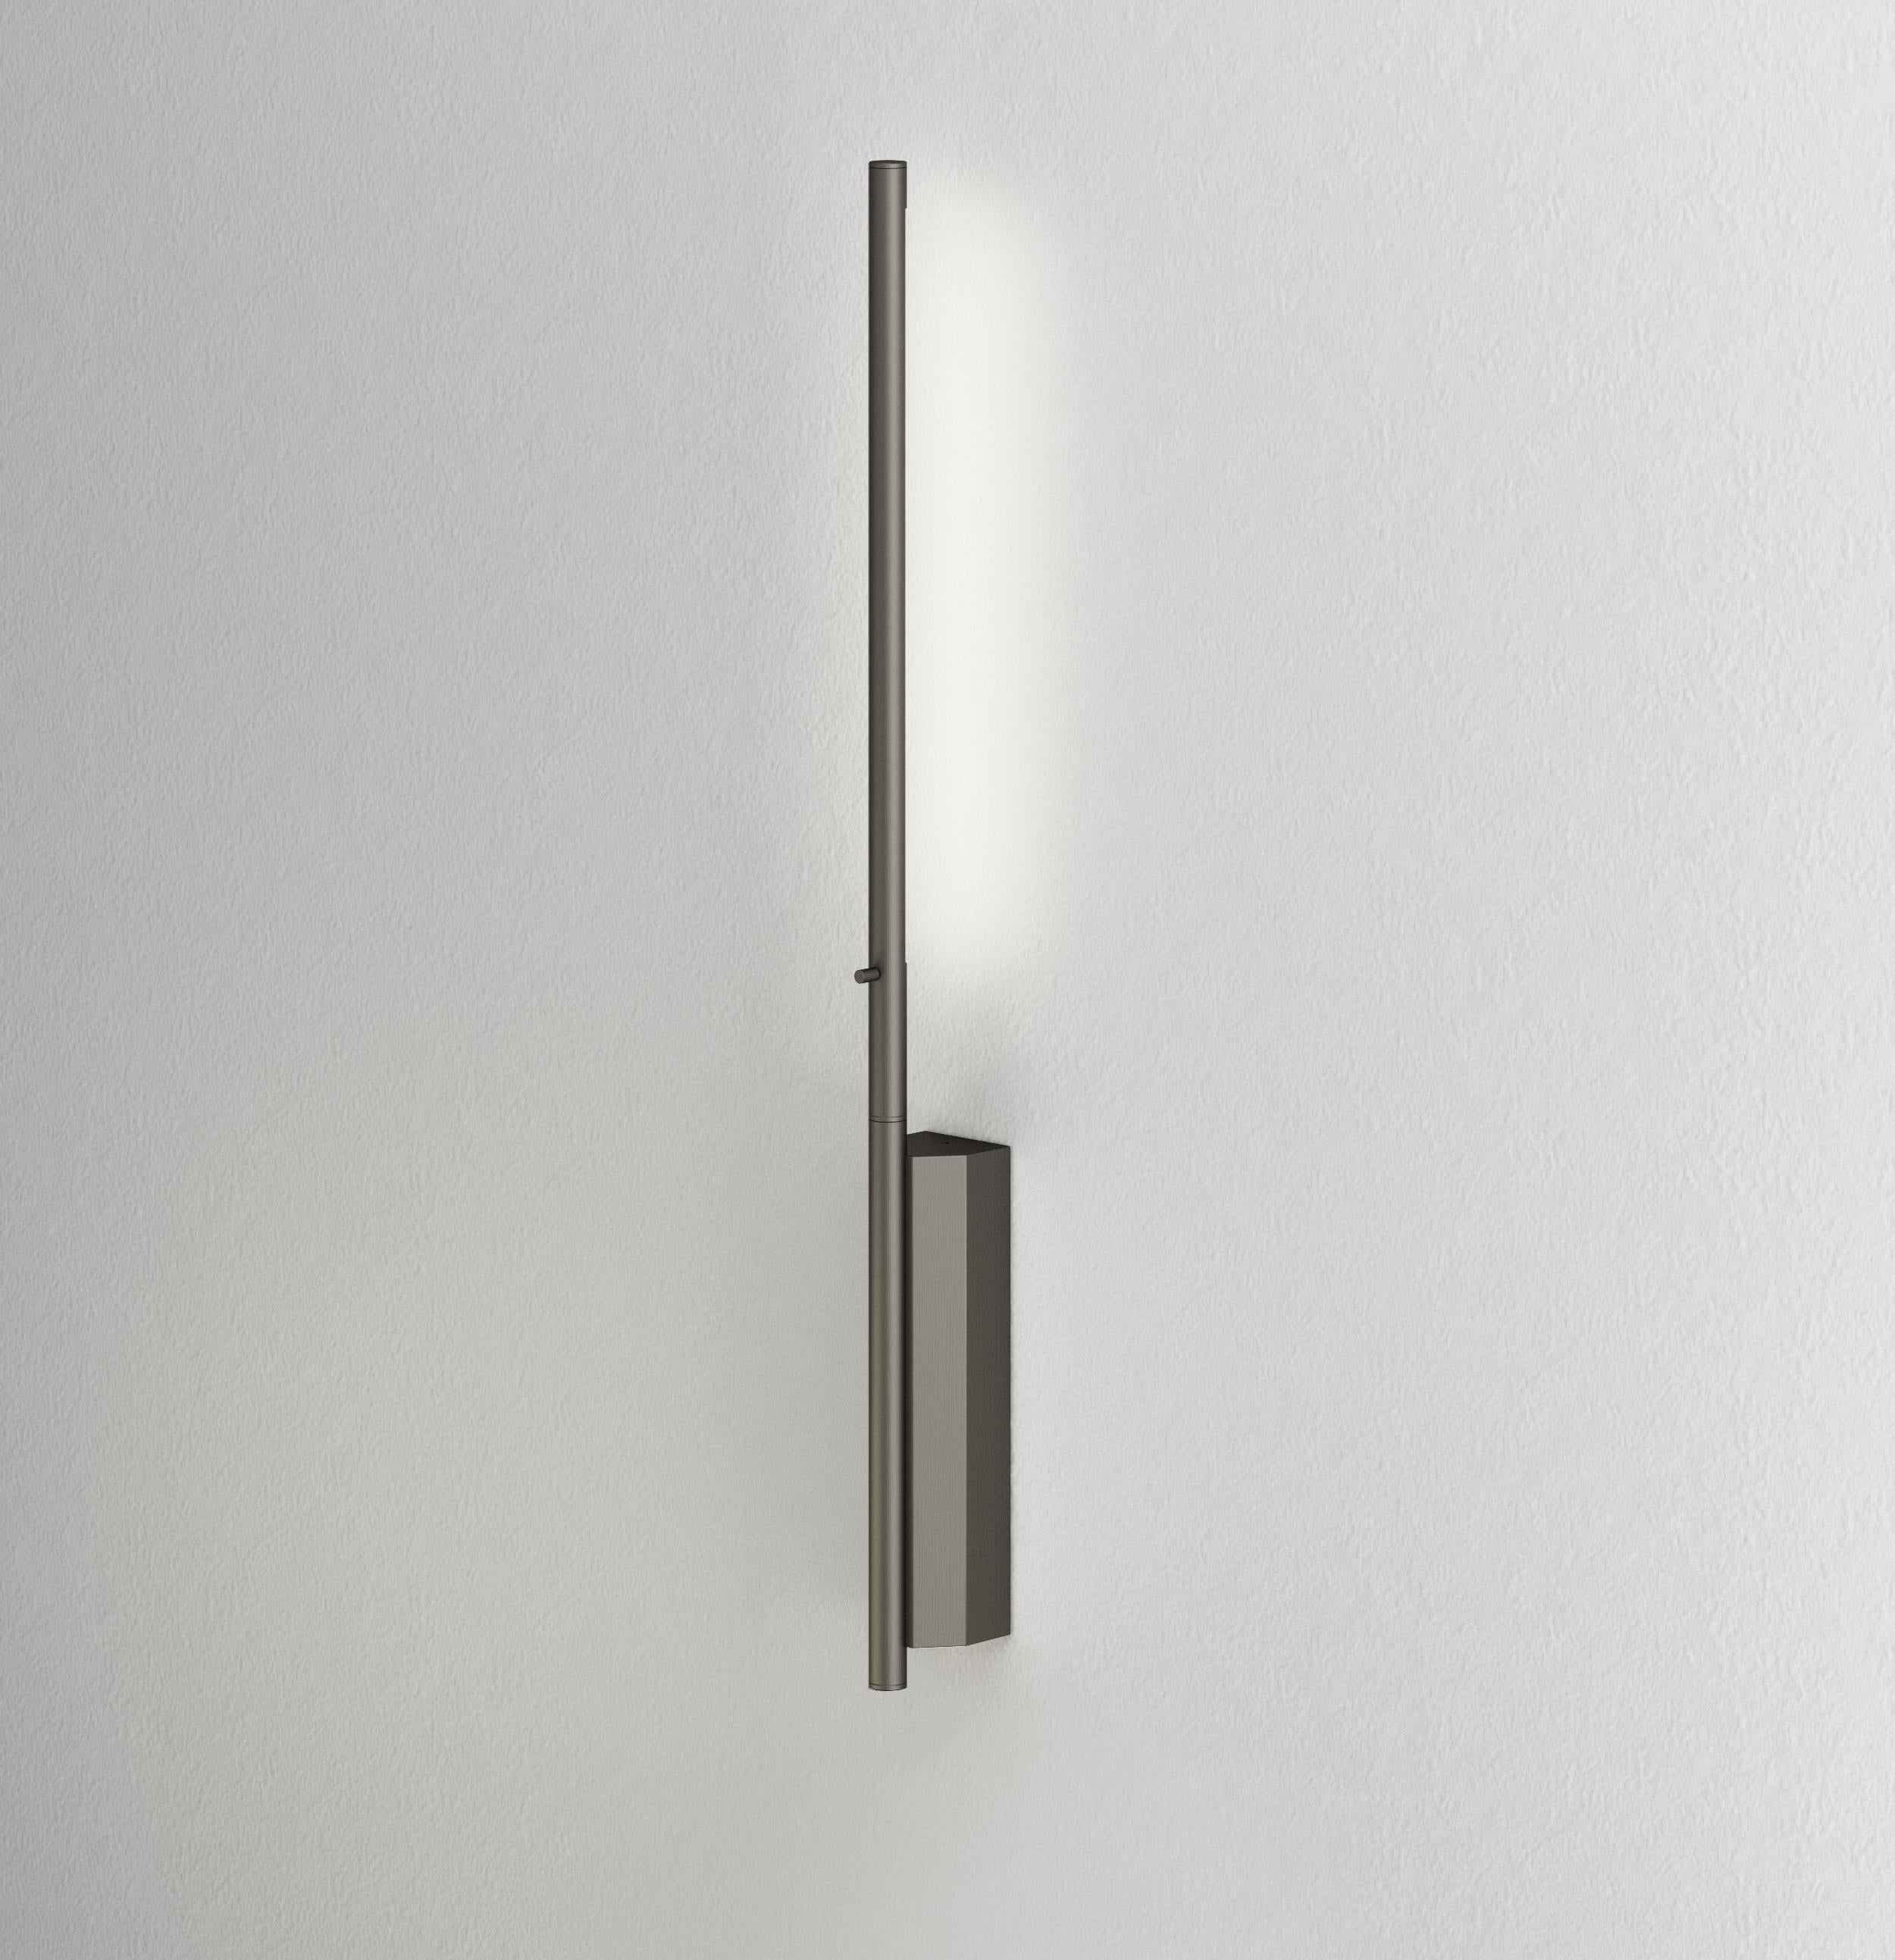 IP Link 580 Satin Graphite wall light by Emilie Cathelineau
Dimensions: D4.5 x W5 X H58 cm
Materials: Solid brass, Satin Graphite, LED, Polycarbonate.
Others finishes and dimensions are available.

All our lamps can be wired according to each